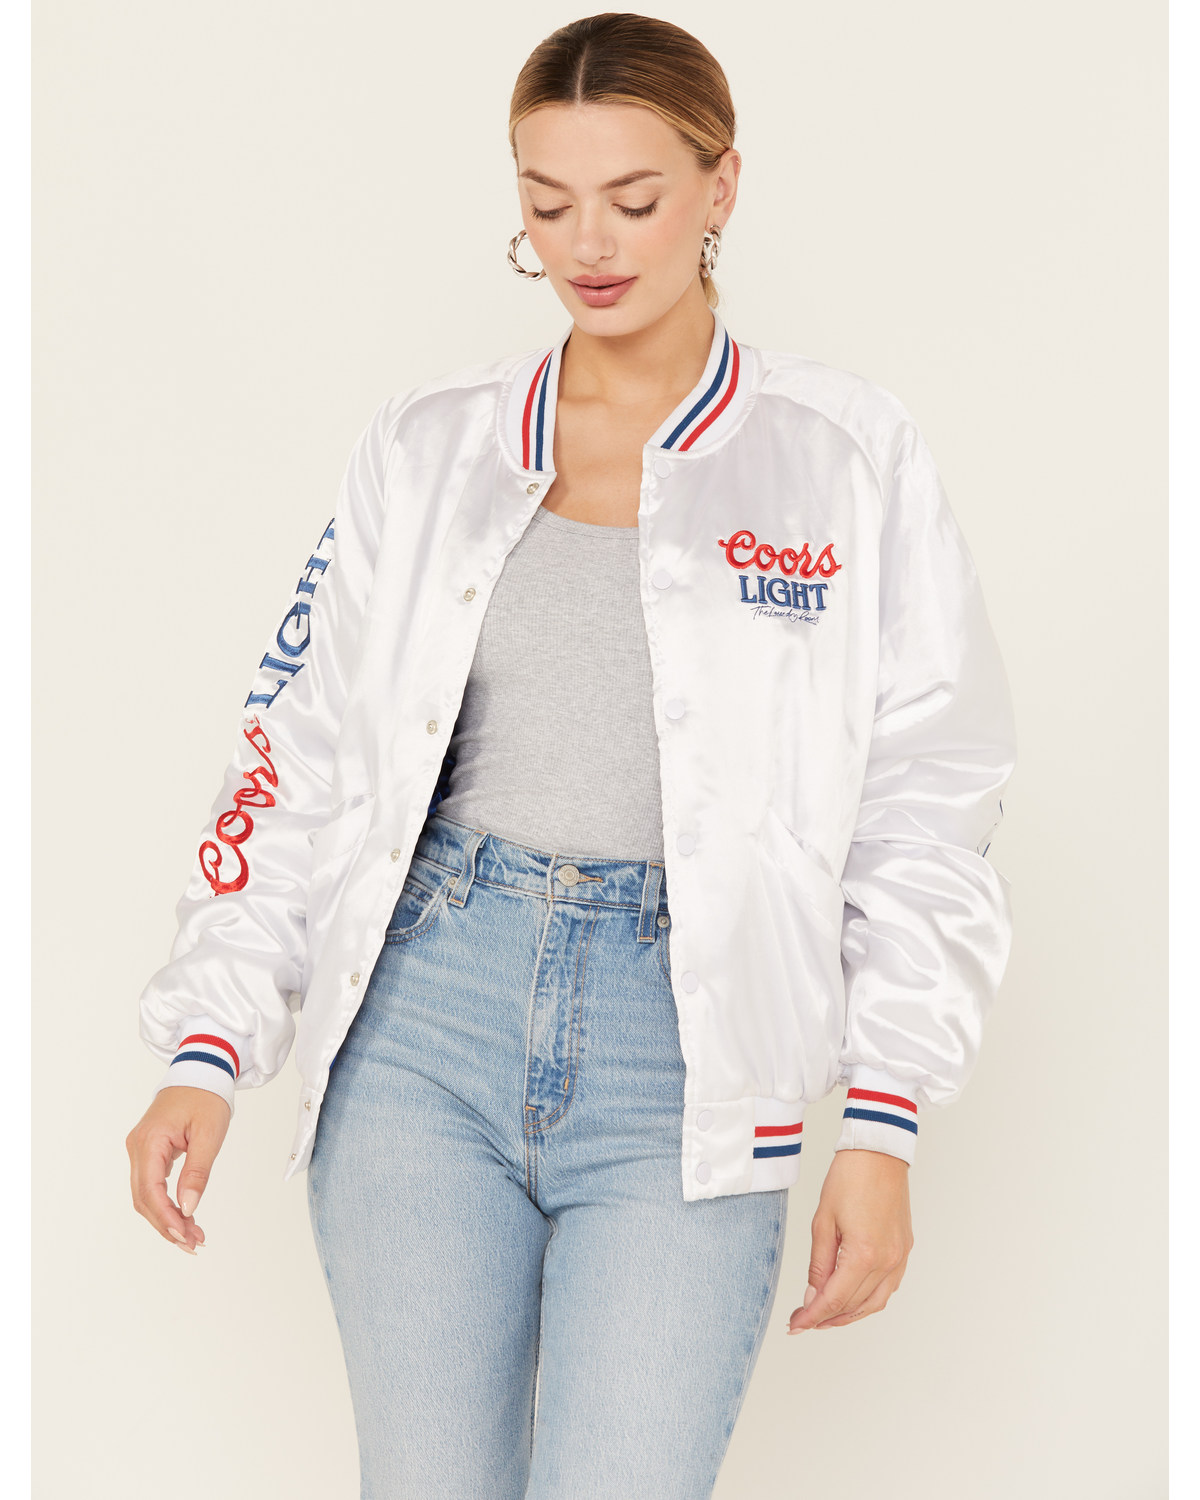 The Laundry Room Women's Faux Satin Coors Light Bomber Jacket